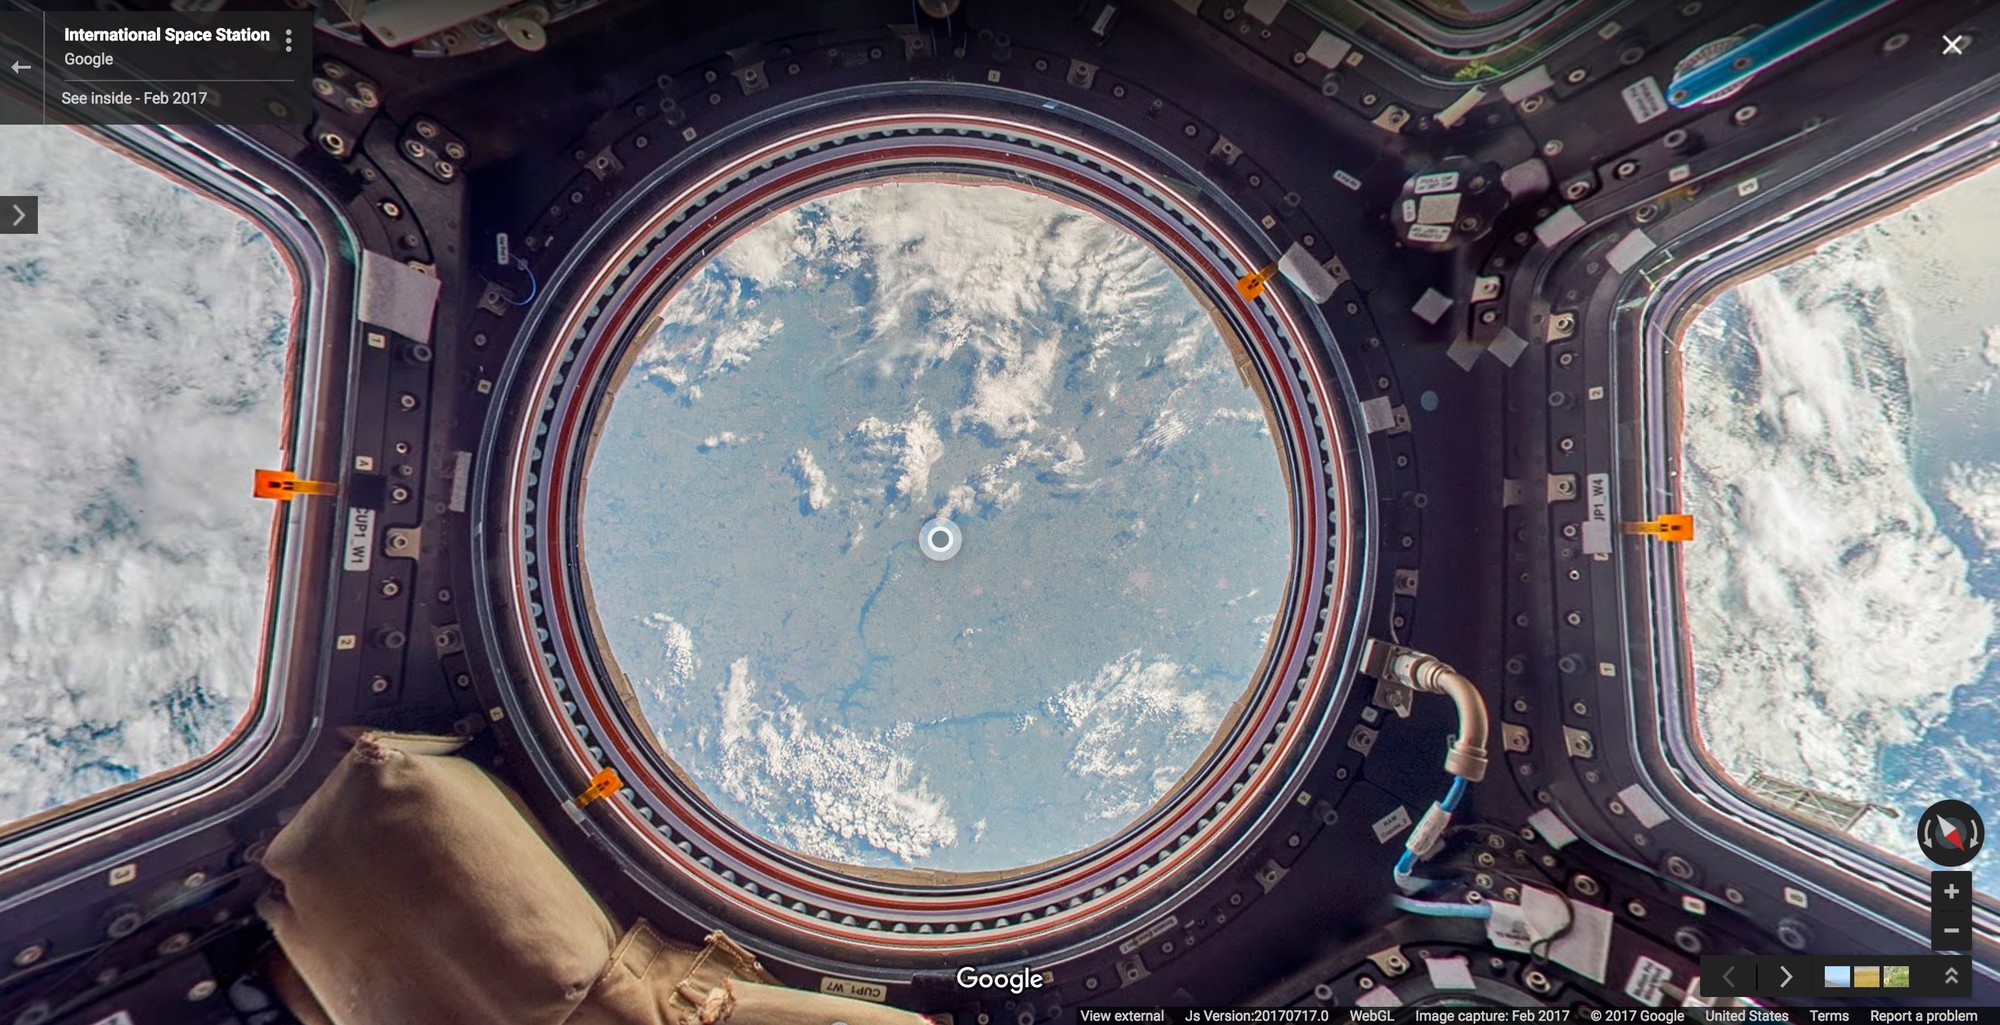 Resin, which closed up hole on the ISS, was quite